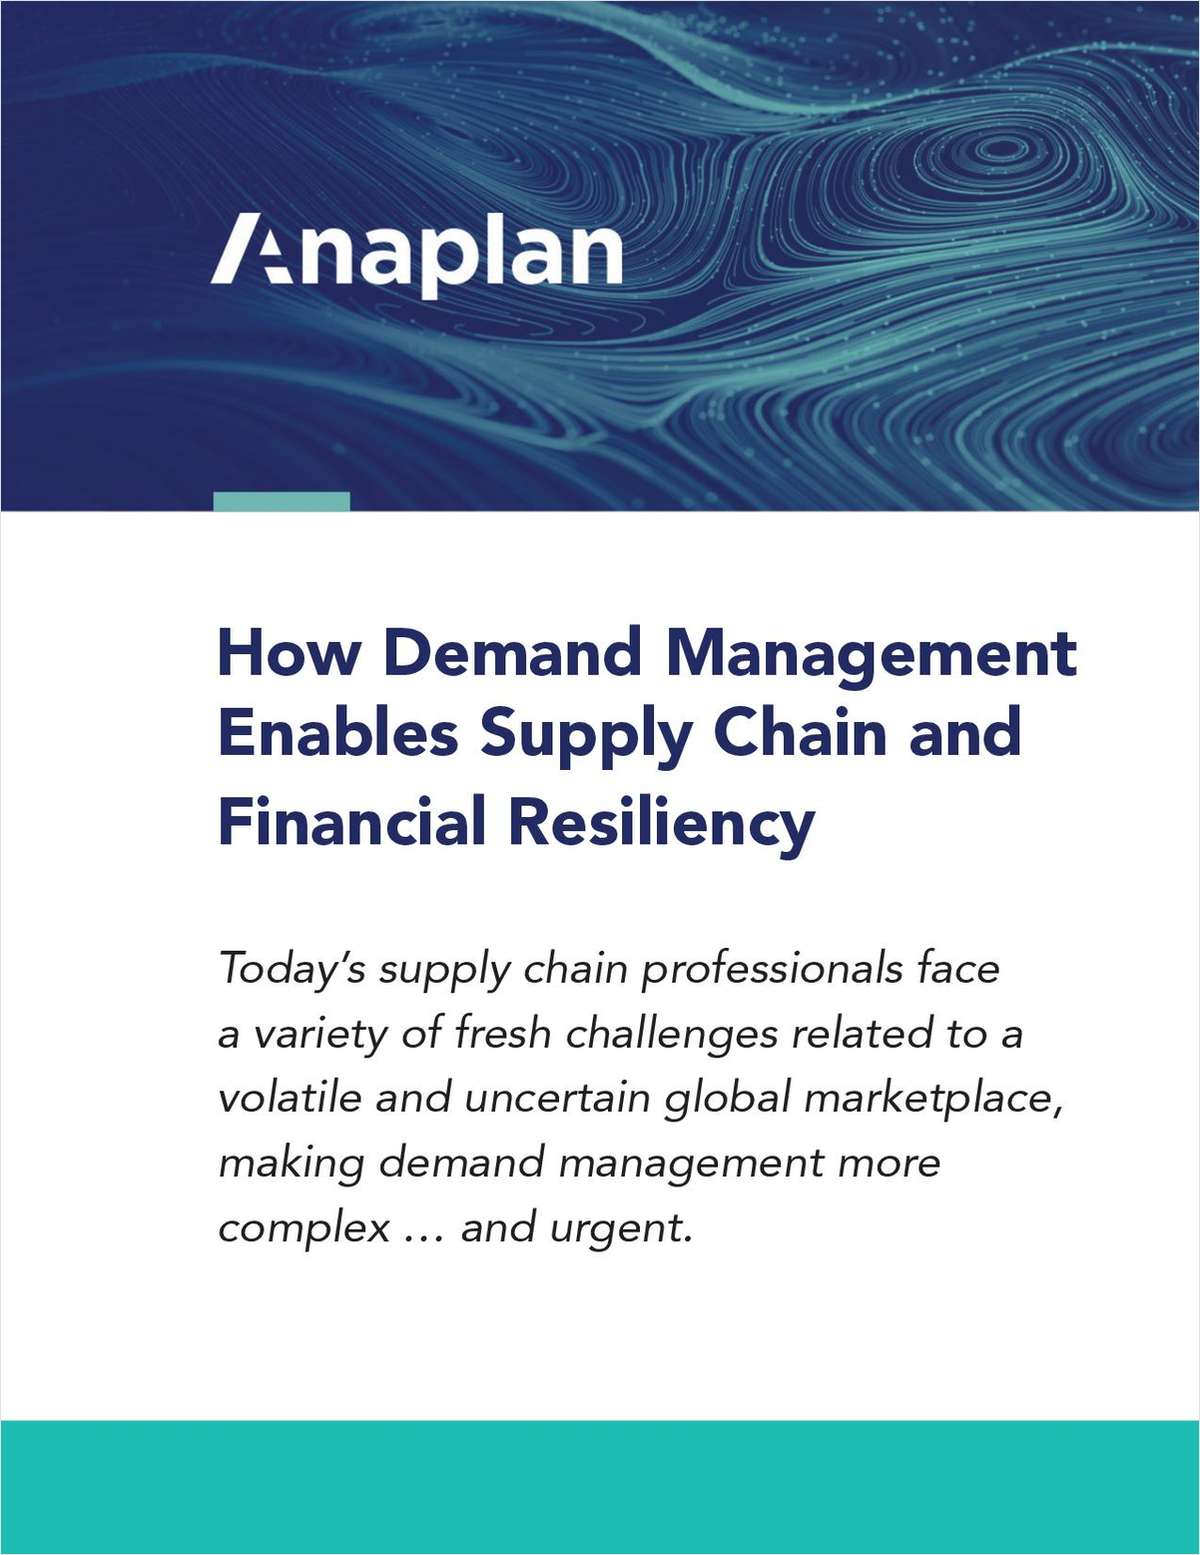 How Demand Management Enables Supply Chain and Financial Resiliency